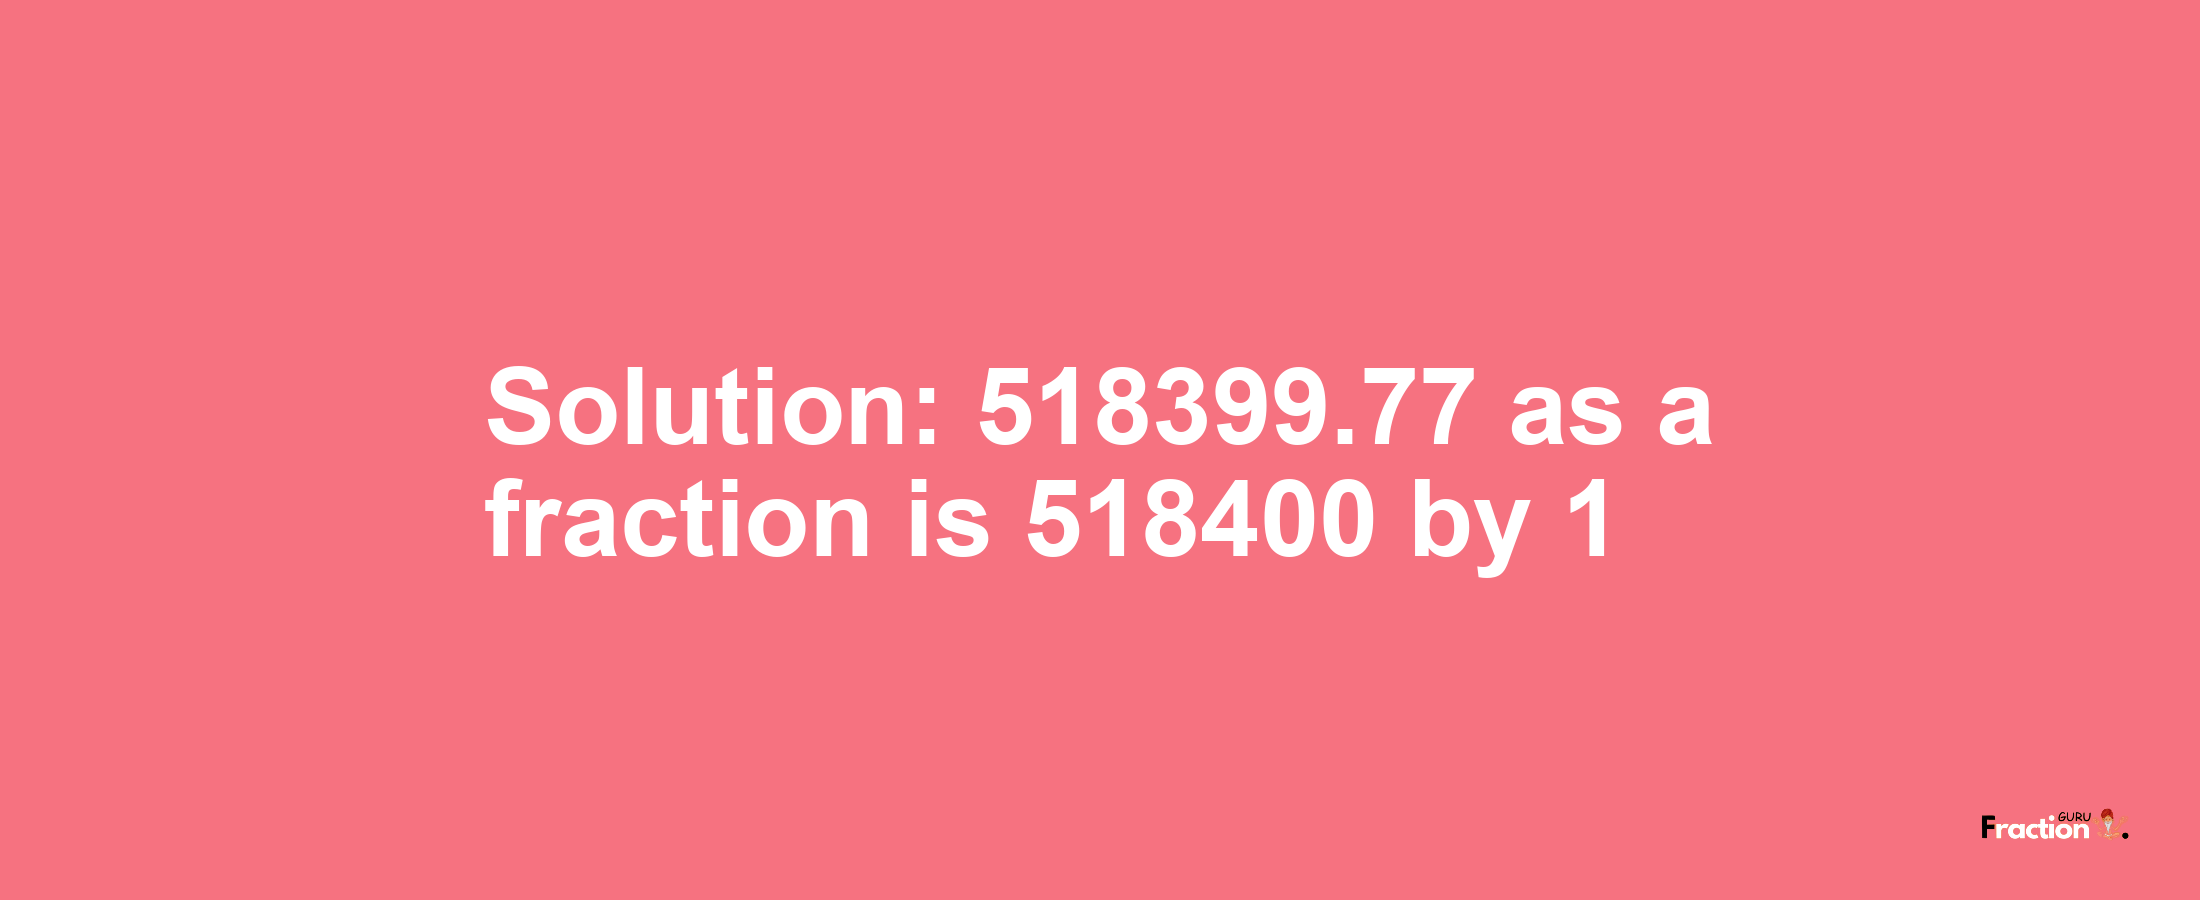 Solution:518399.77 as a fraction is 518400/1